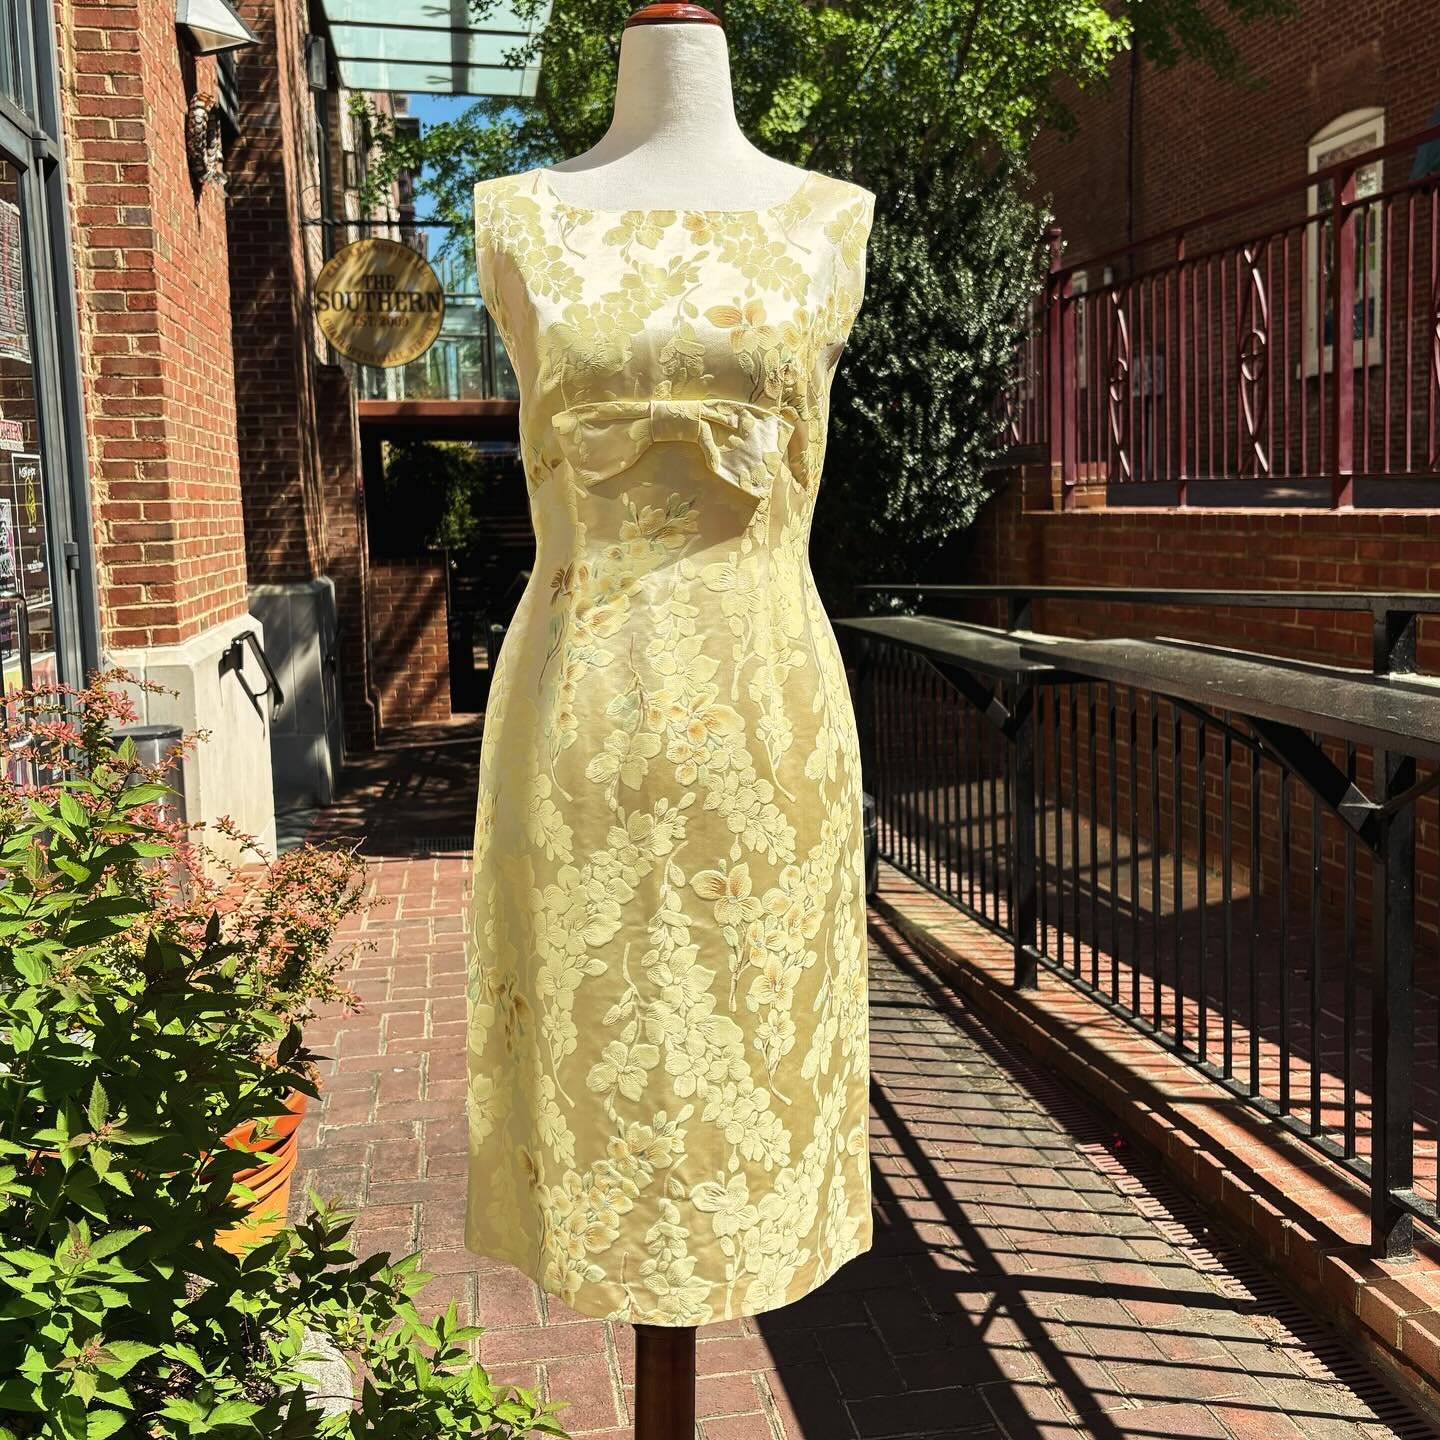 🌿🌼🌿1950s silk yellow dogwood dress with bow and beautiful flattering details 🌿🌼 I love handmade vintage. Everyone was some level of a seamstress then, they made their clothing to last. Fast fashion was not a thing. They were beautiful and one of